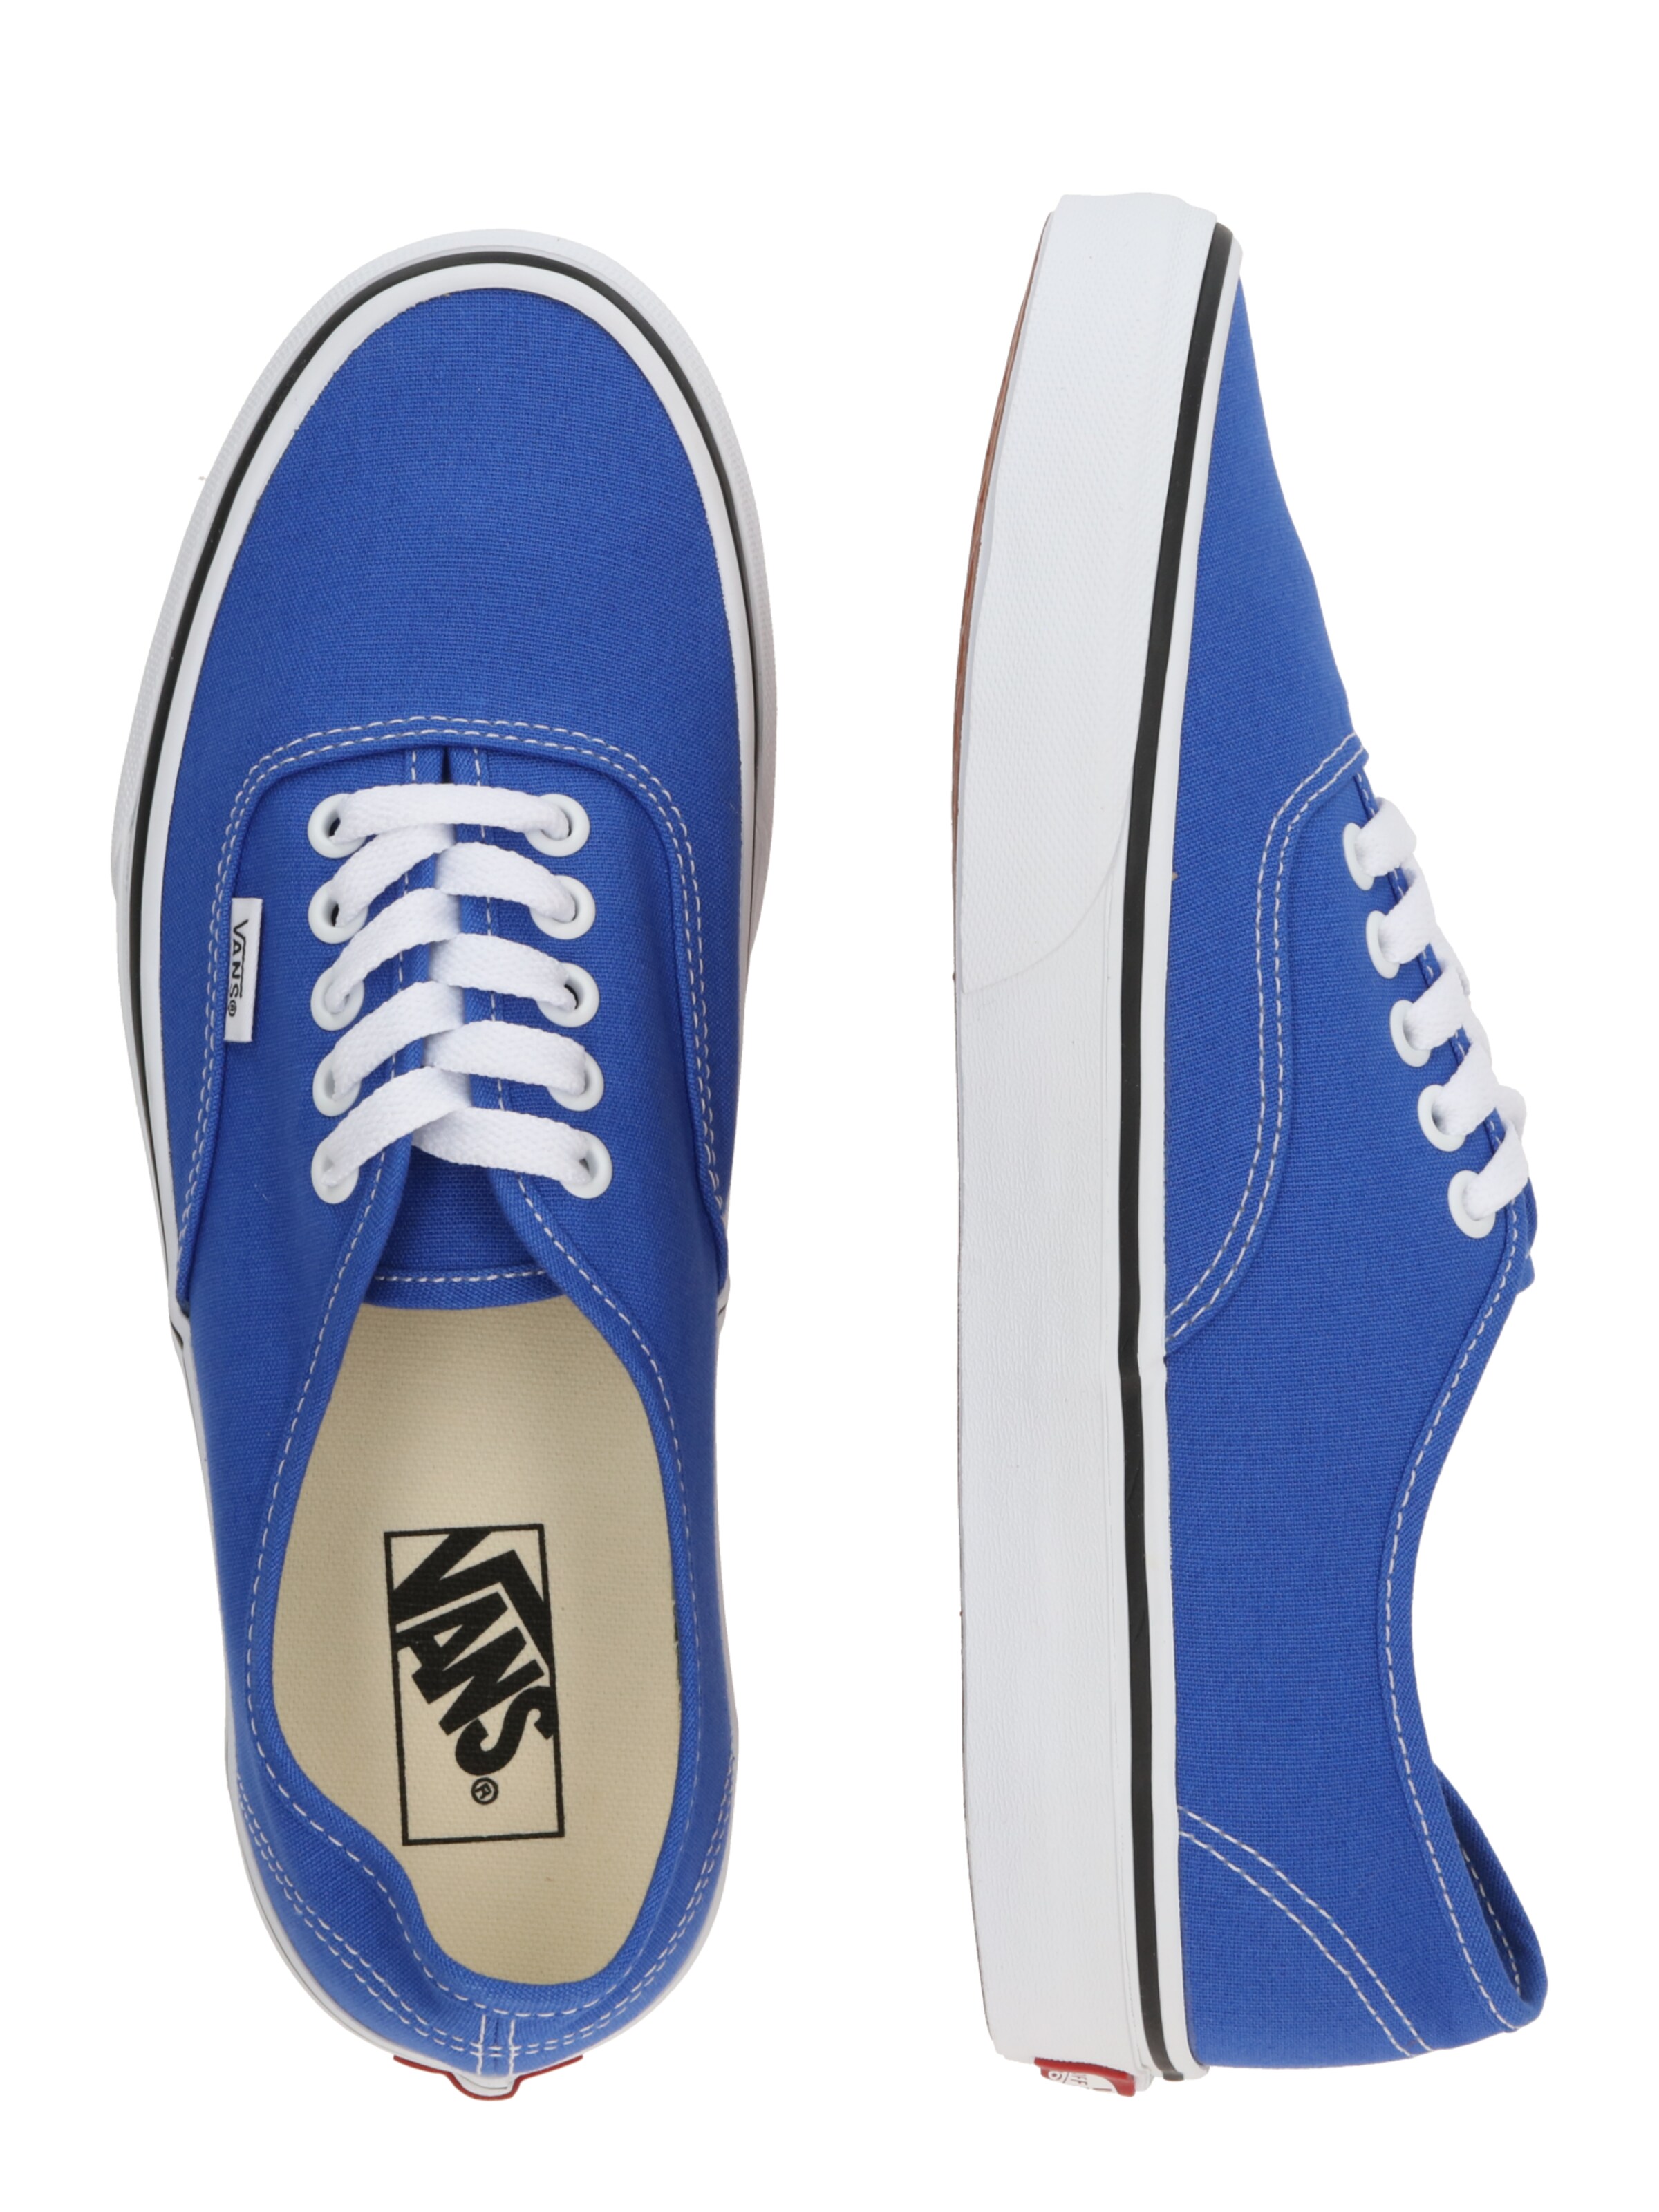 Buy Vans Men (Eco Theory) Moonlight Blue/Marshmallow Canvas Casual Sneakers  71002962 4 at Amazon.in